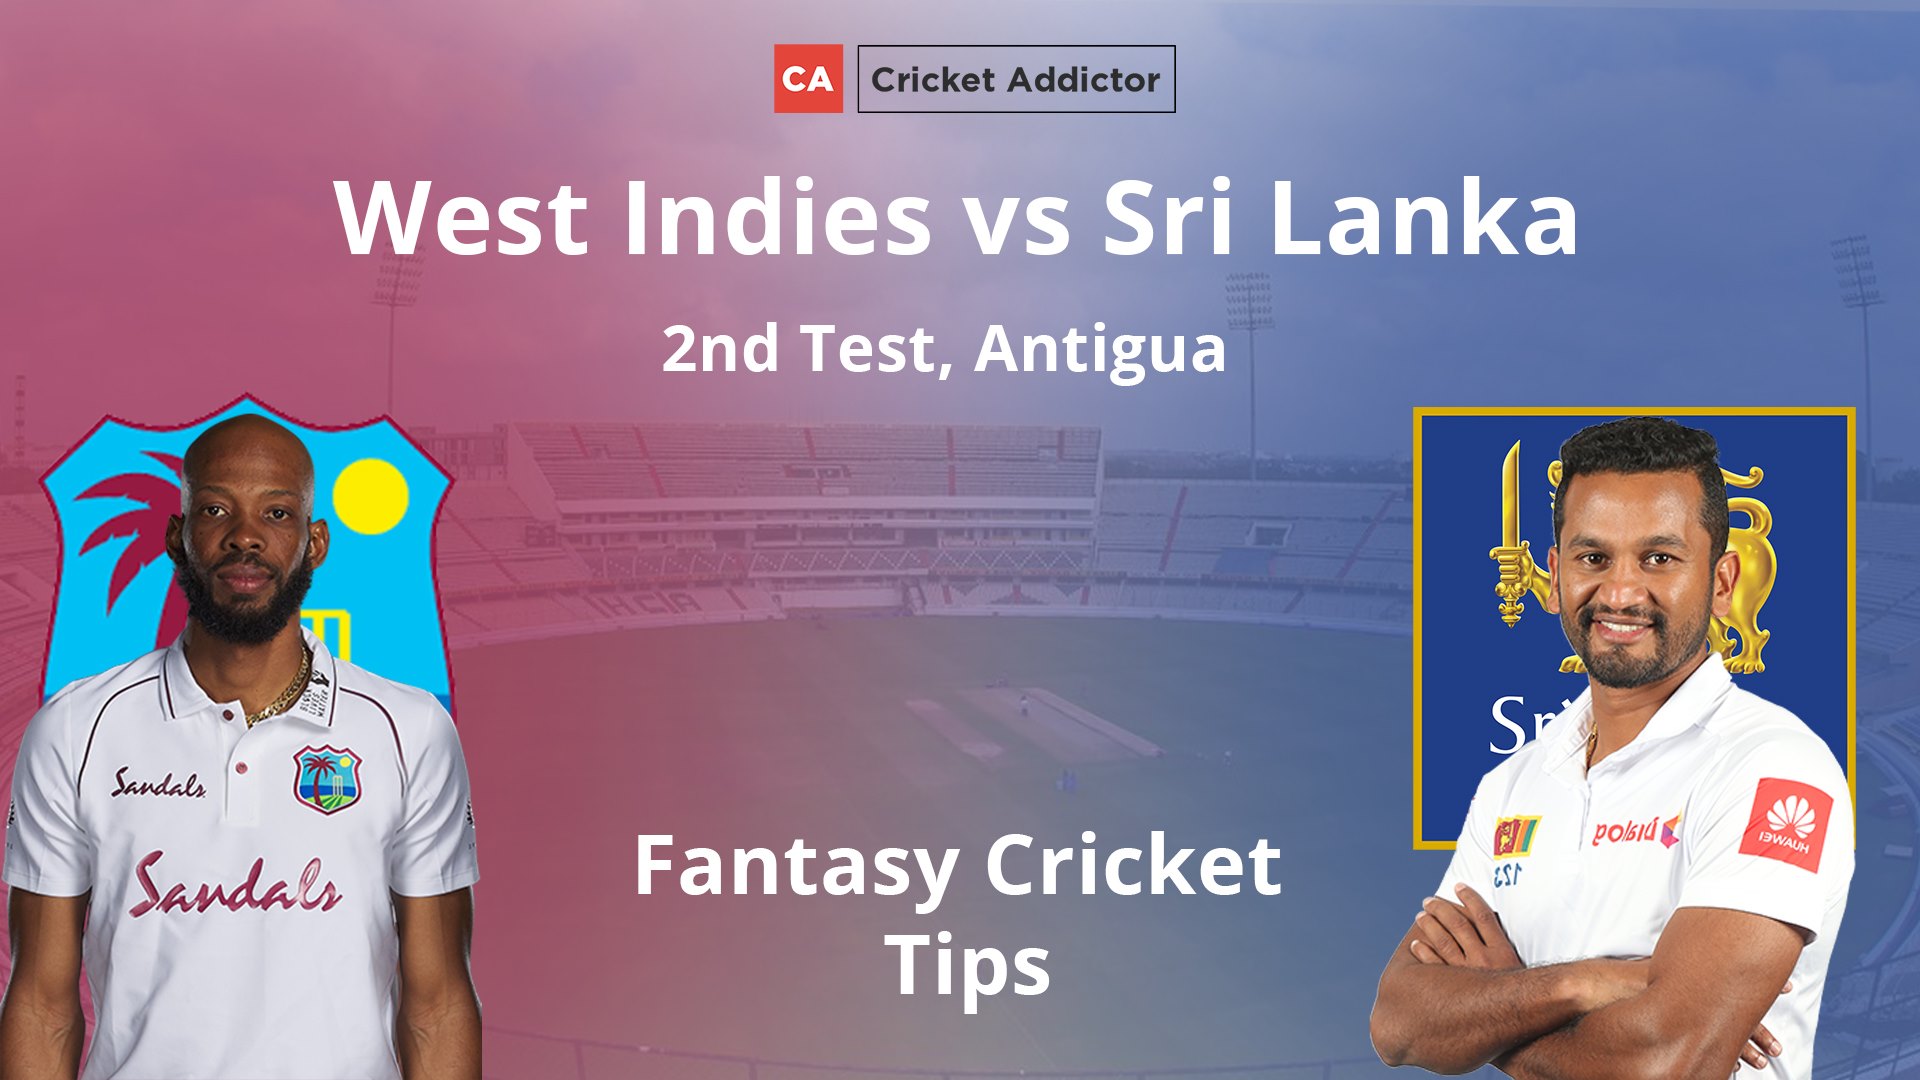 West Indies vs Sri Lanka 2nd Test Dream11 Prediction, Fantasy Cricket Tips, Playing XI, Pitch Report, Dream11 Team, and Injury Update.